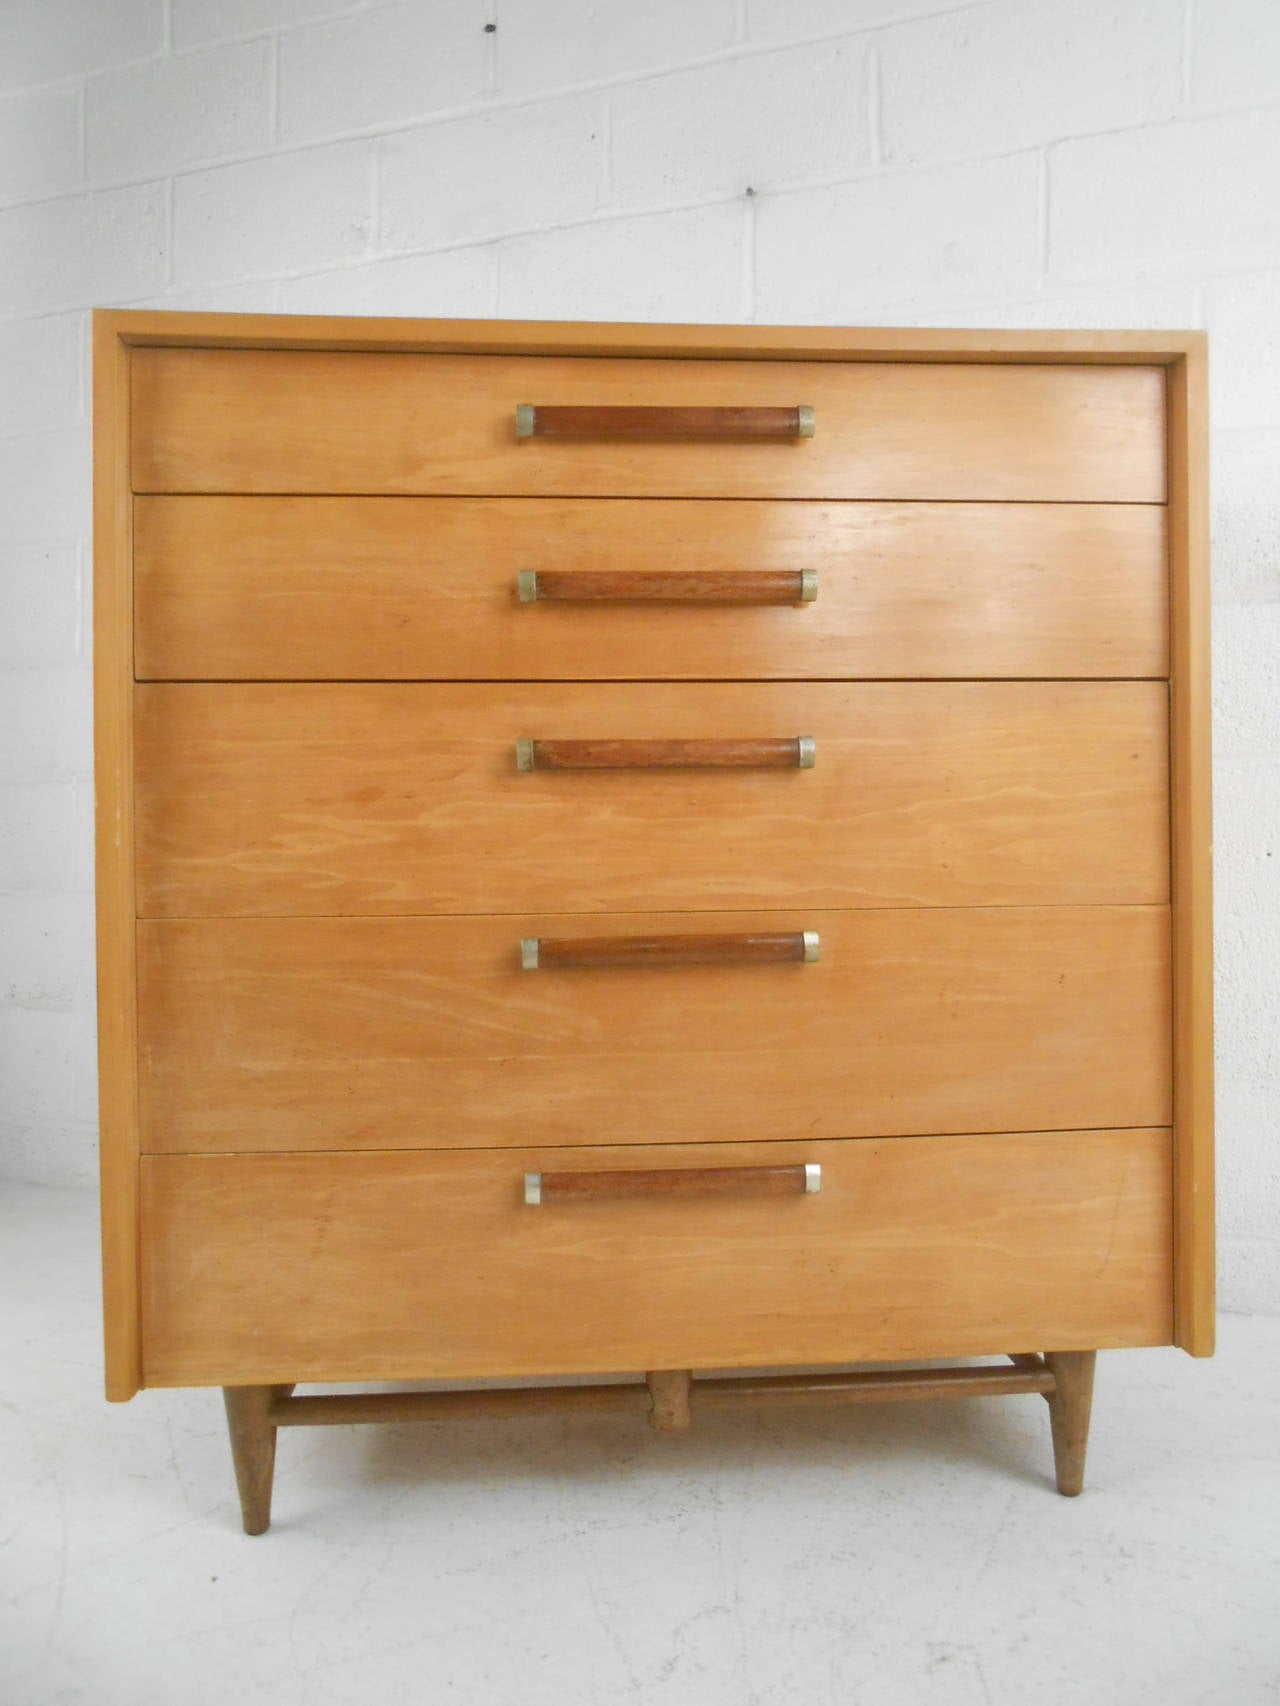 This unique and well constructed mid-century Maple dresser features wonderful details including tapered legs with added stretchers and unique drawer pulls. Matching low dresser available, wonderful piece for any modern interior. Please confirm item